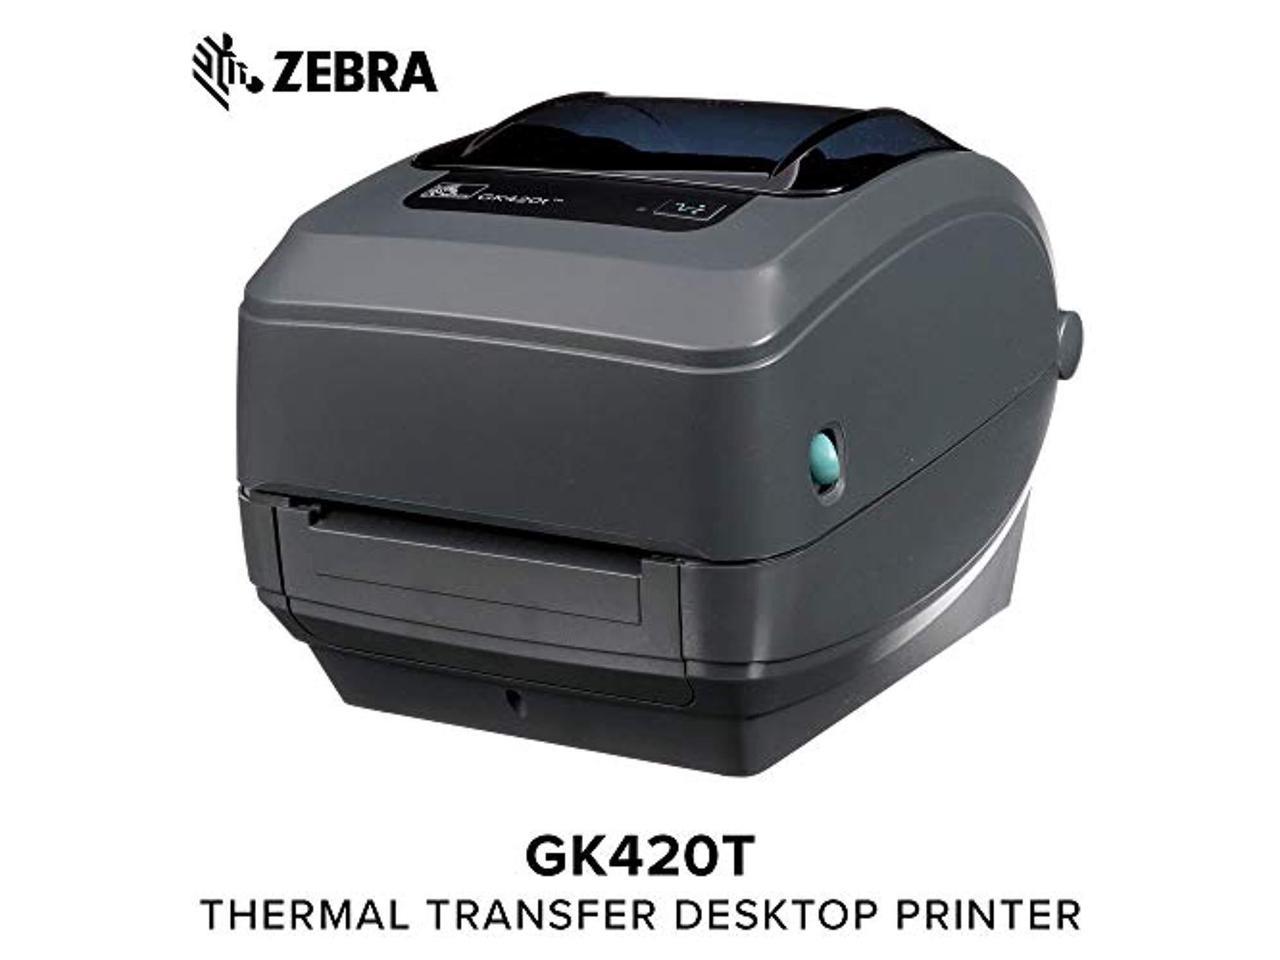 Zebra Gk420t Thermal Transfer Desktop Printer For Labels Receipts Barcodes Tags And Wrist 4820